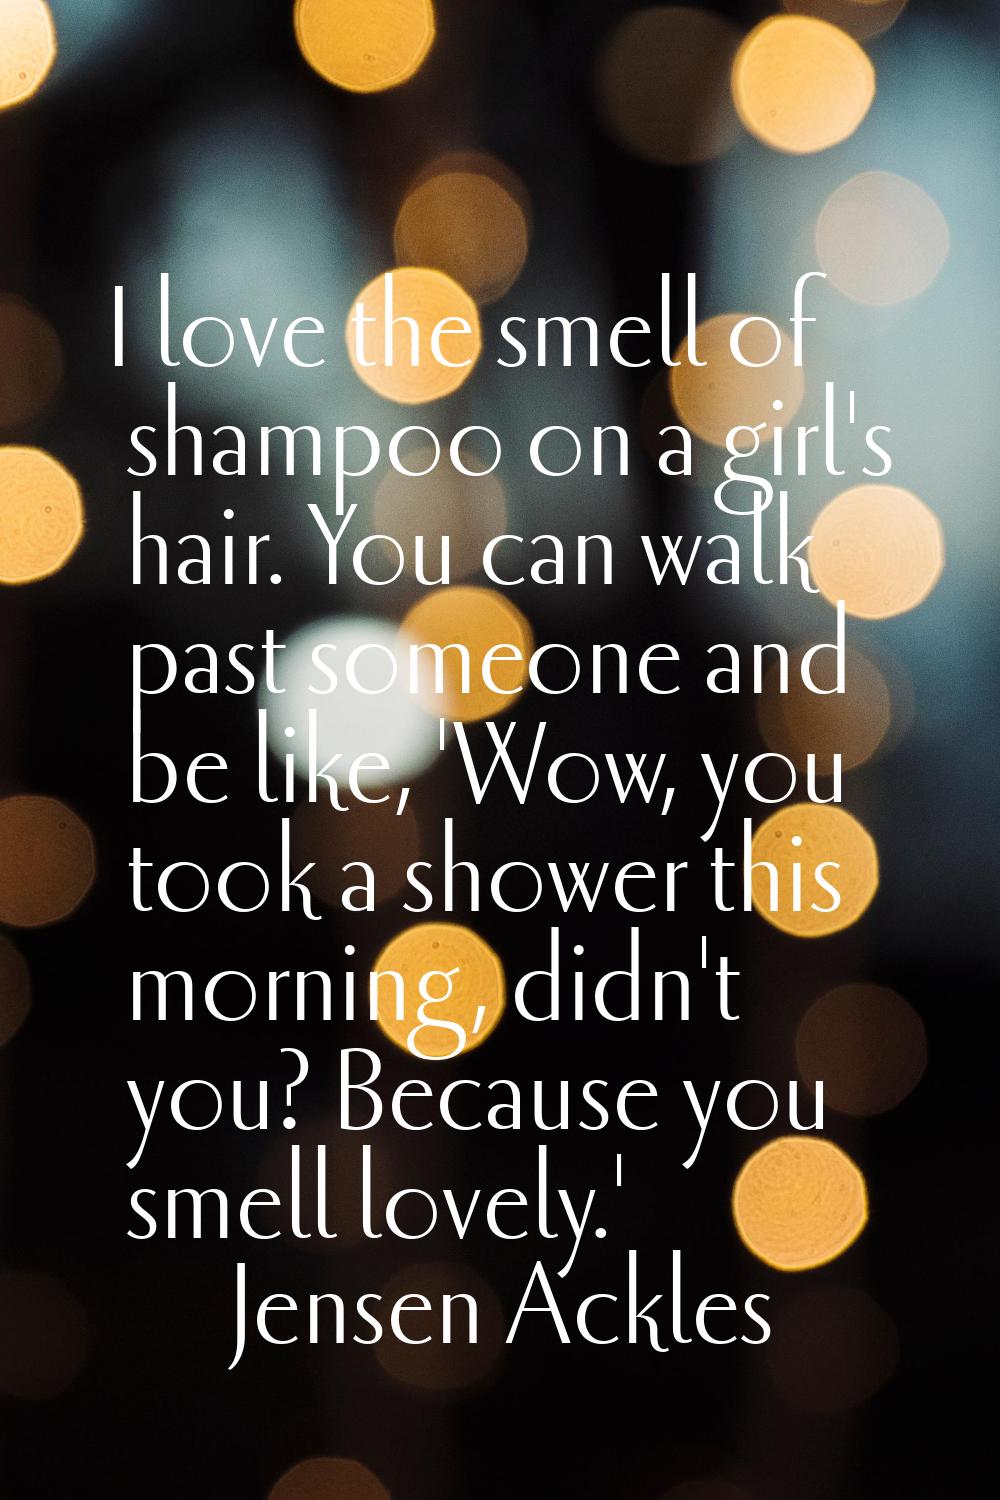 I love the smell of shampoo on a girl's hair. You can walk past someone and be like, 'Wow, you took